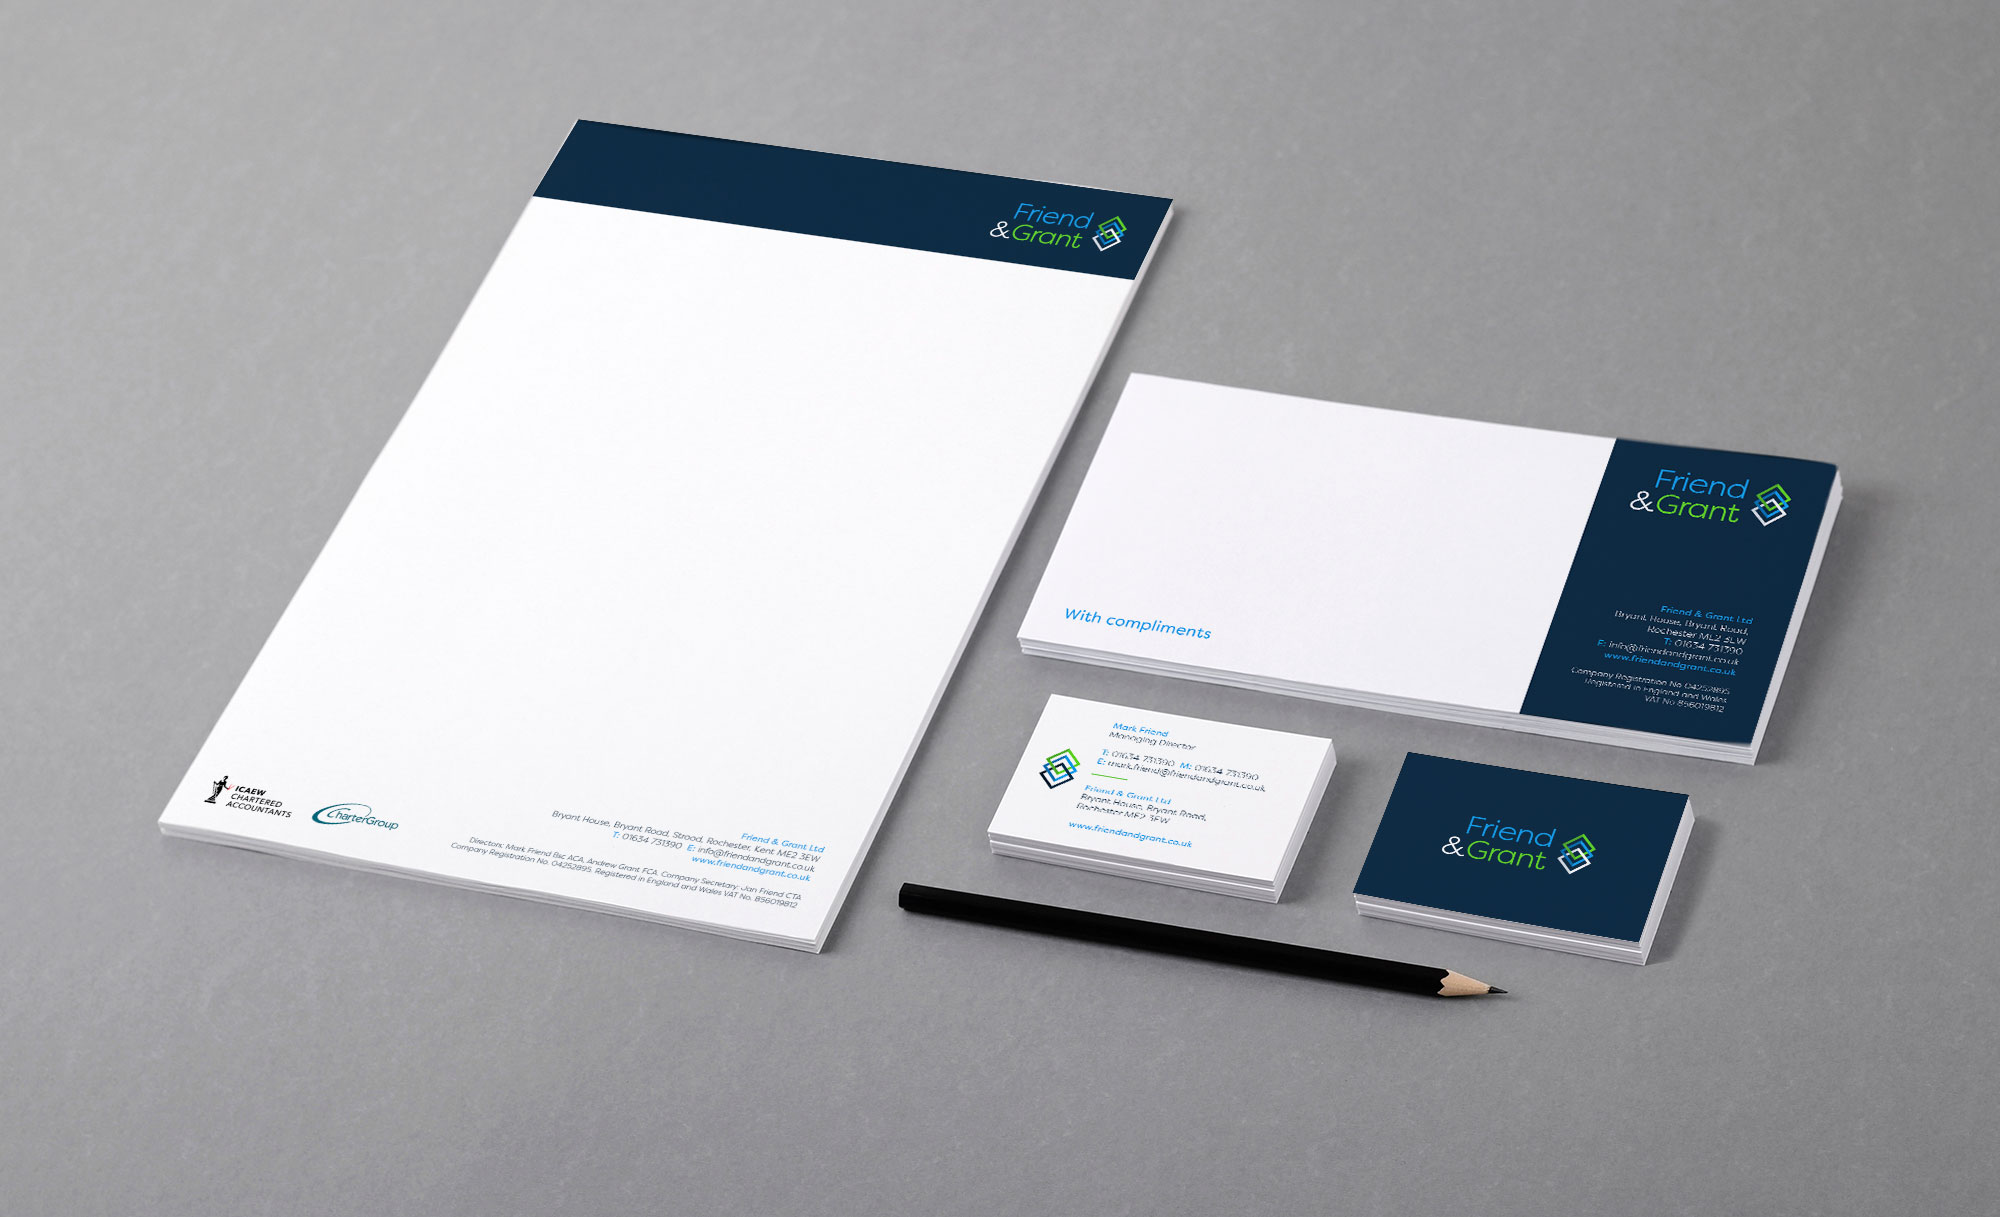 Branded stationery for Friend & Grant by Supersonic Playground